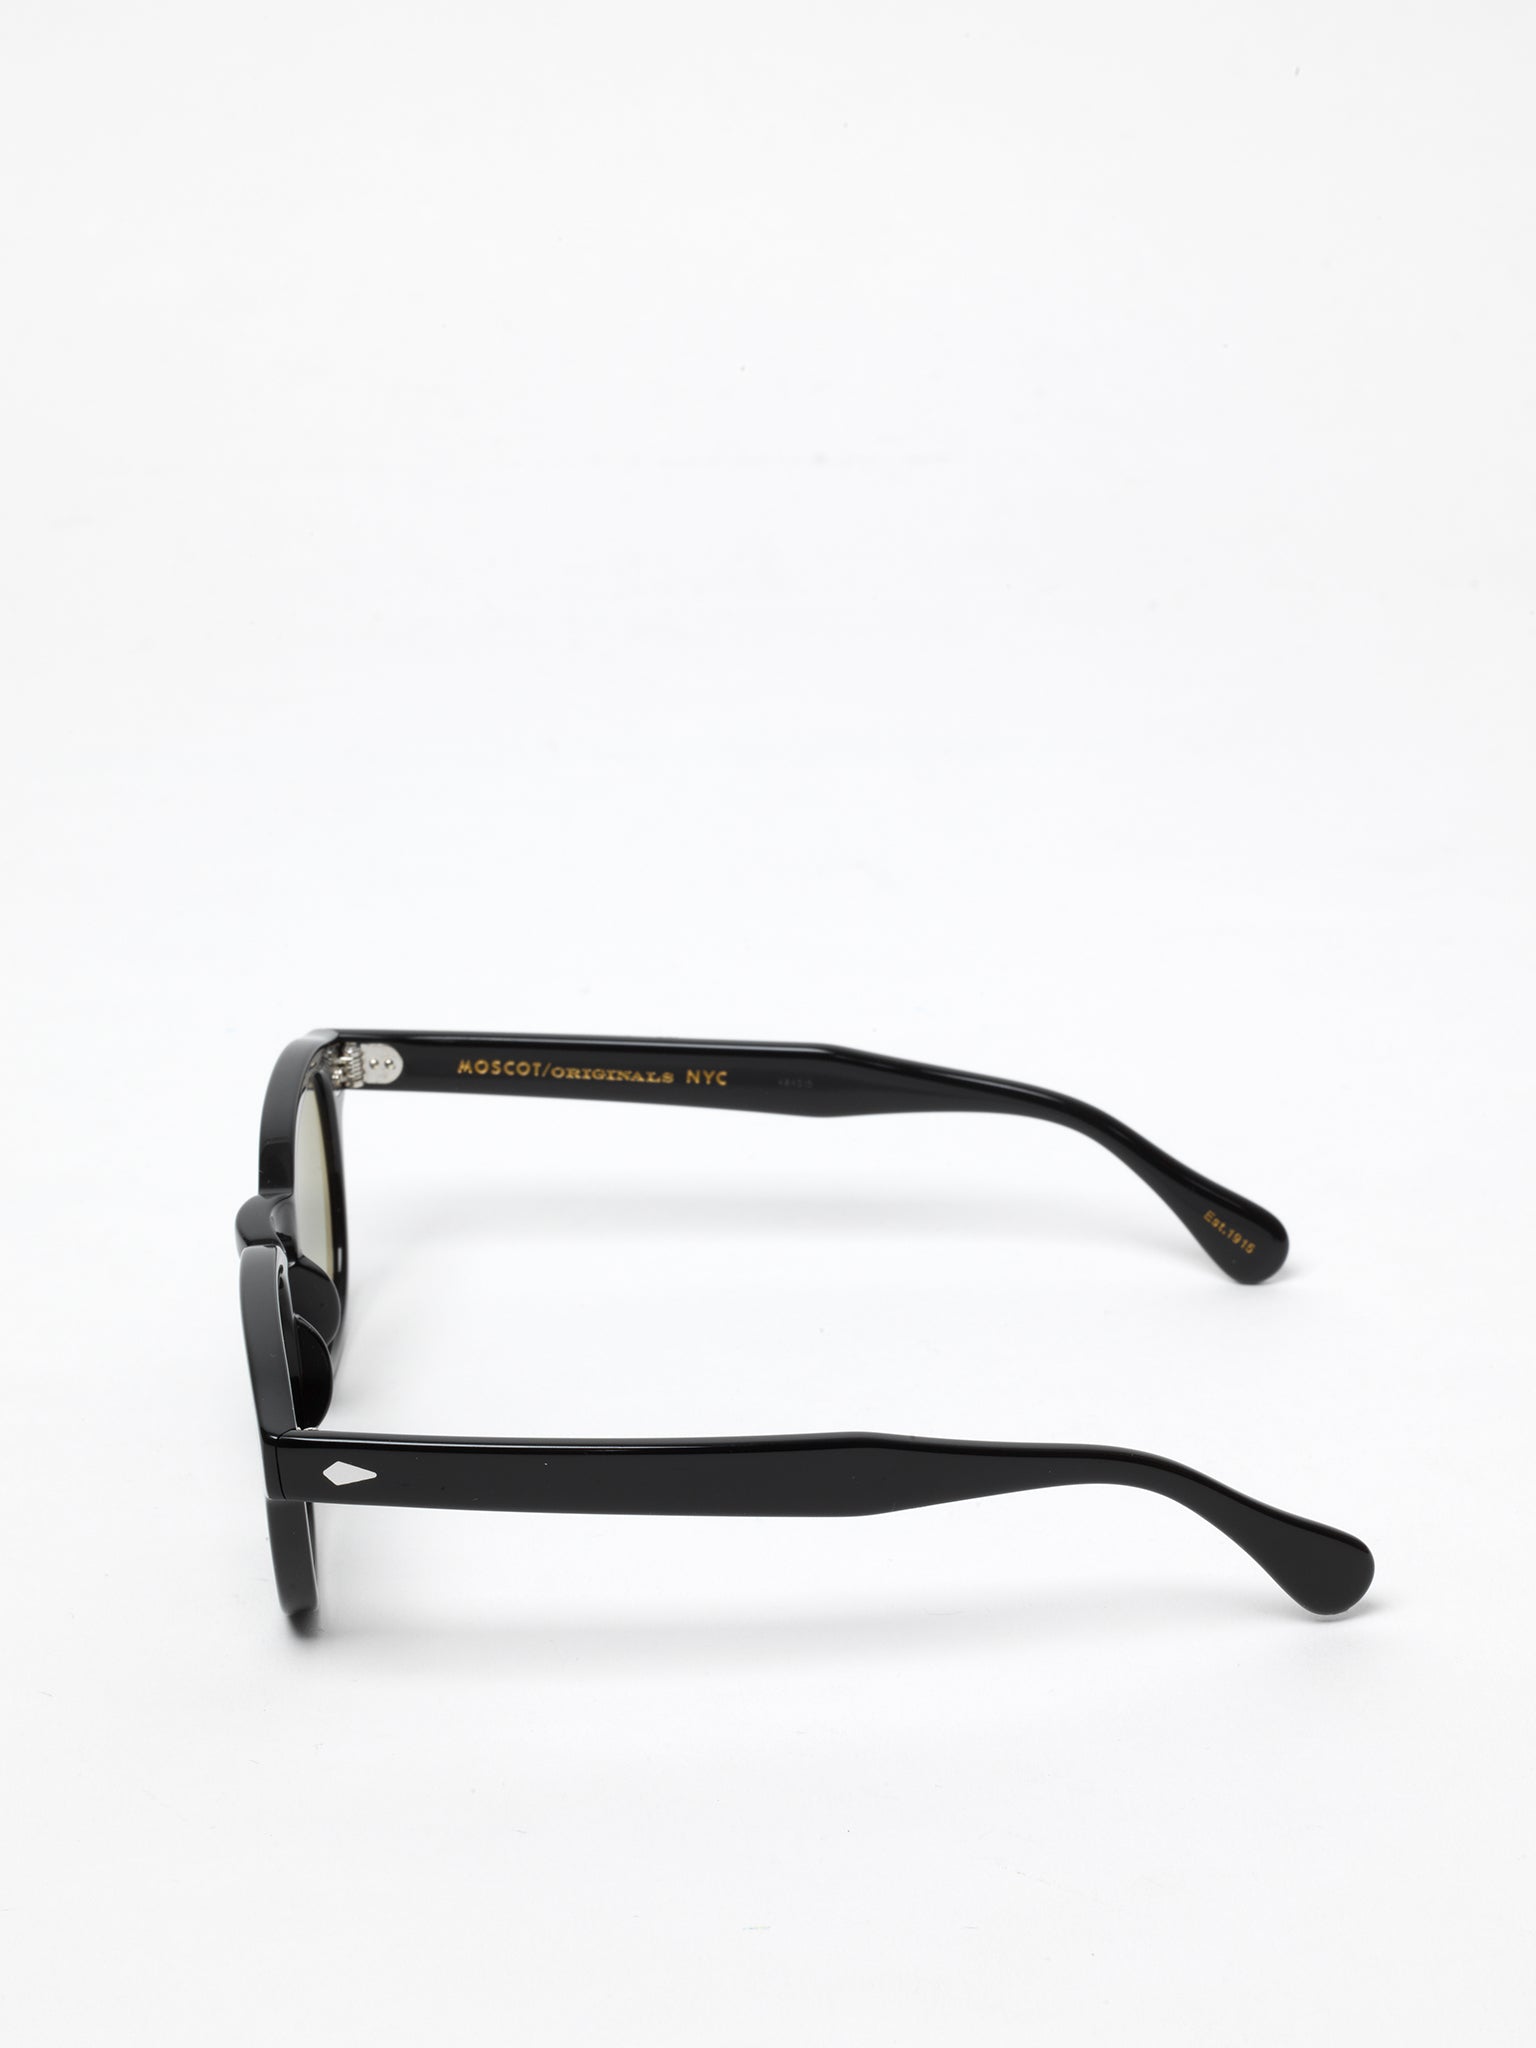 Moscot / Lemtosh / Black With Forest Wood - I Visionari